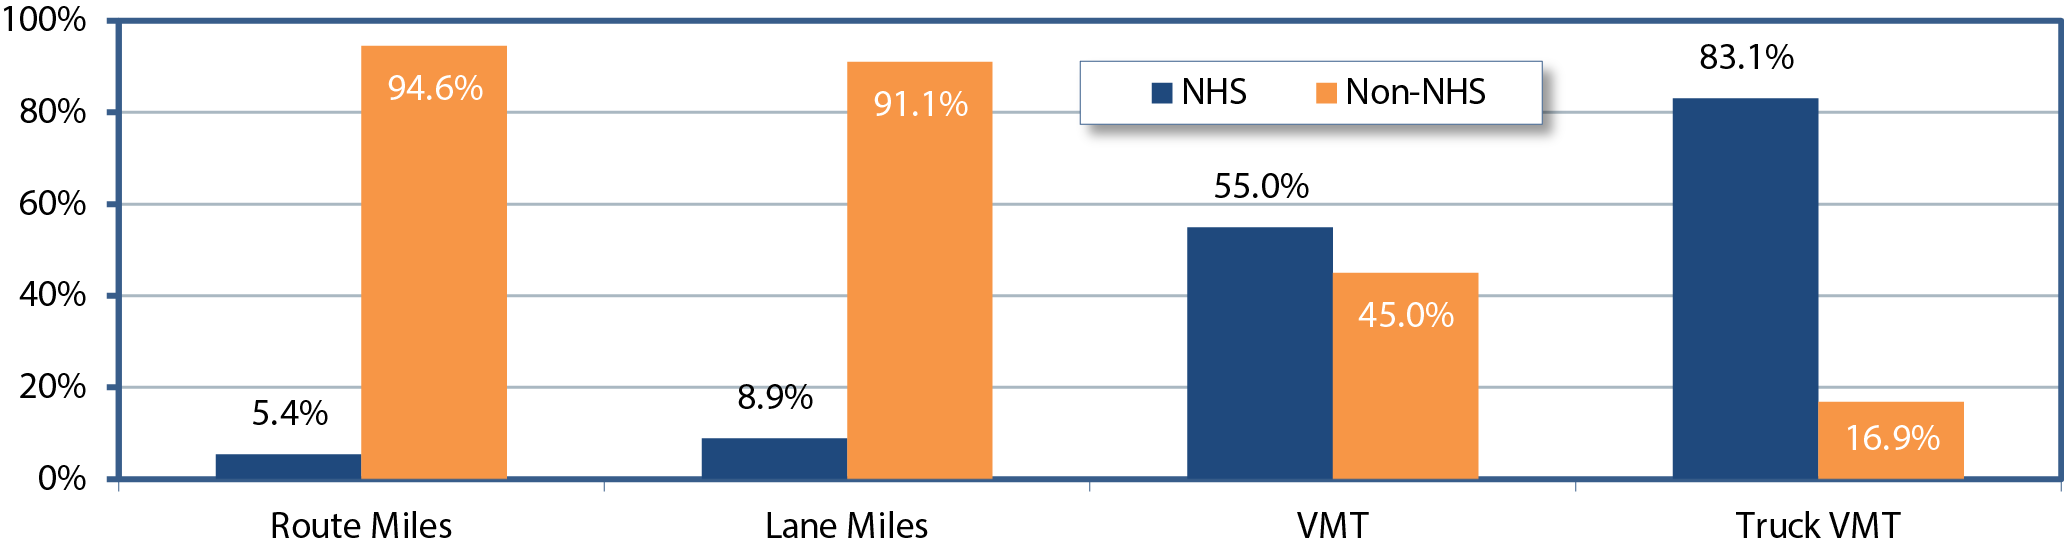 A bar chart plots percent values for NHS and Non-NHS across four categories. For route miles, the values are NHS at 5.4 percent and non-NHS at 94.6 percent . For lane miles, the values are NHS at 8.9 percent and non-NHS at 91.1 percent . For VMT, the values are NHS at 55.0 percent and non-NHS at 45.0 percent . For truck VMT, the values are NHS at 83.1 percent and non-NHS at 16.9 percent . Source: Highway Performance Monitoring System (as of October 2013).